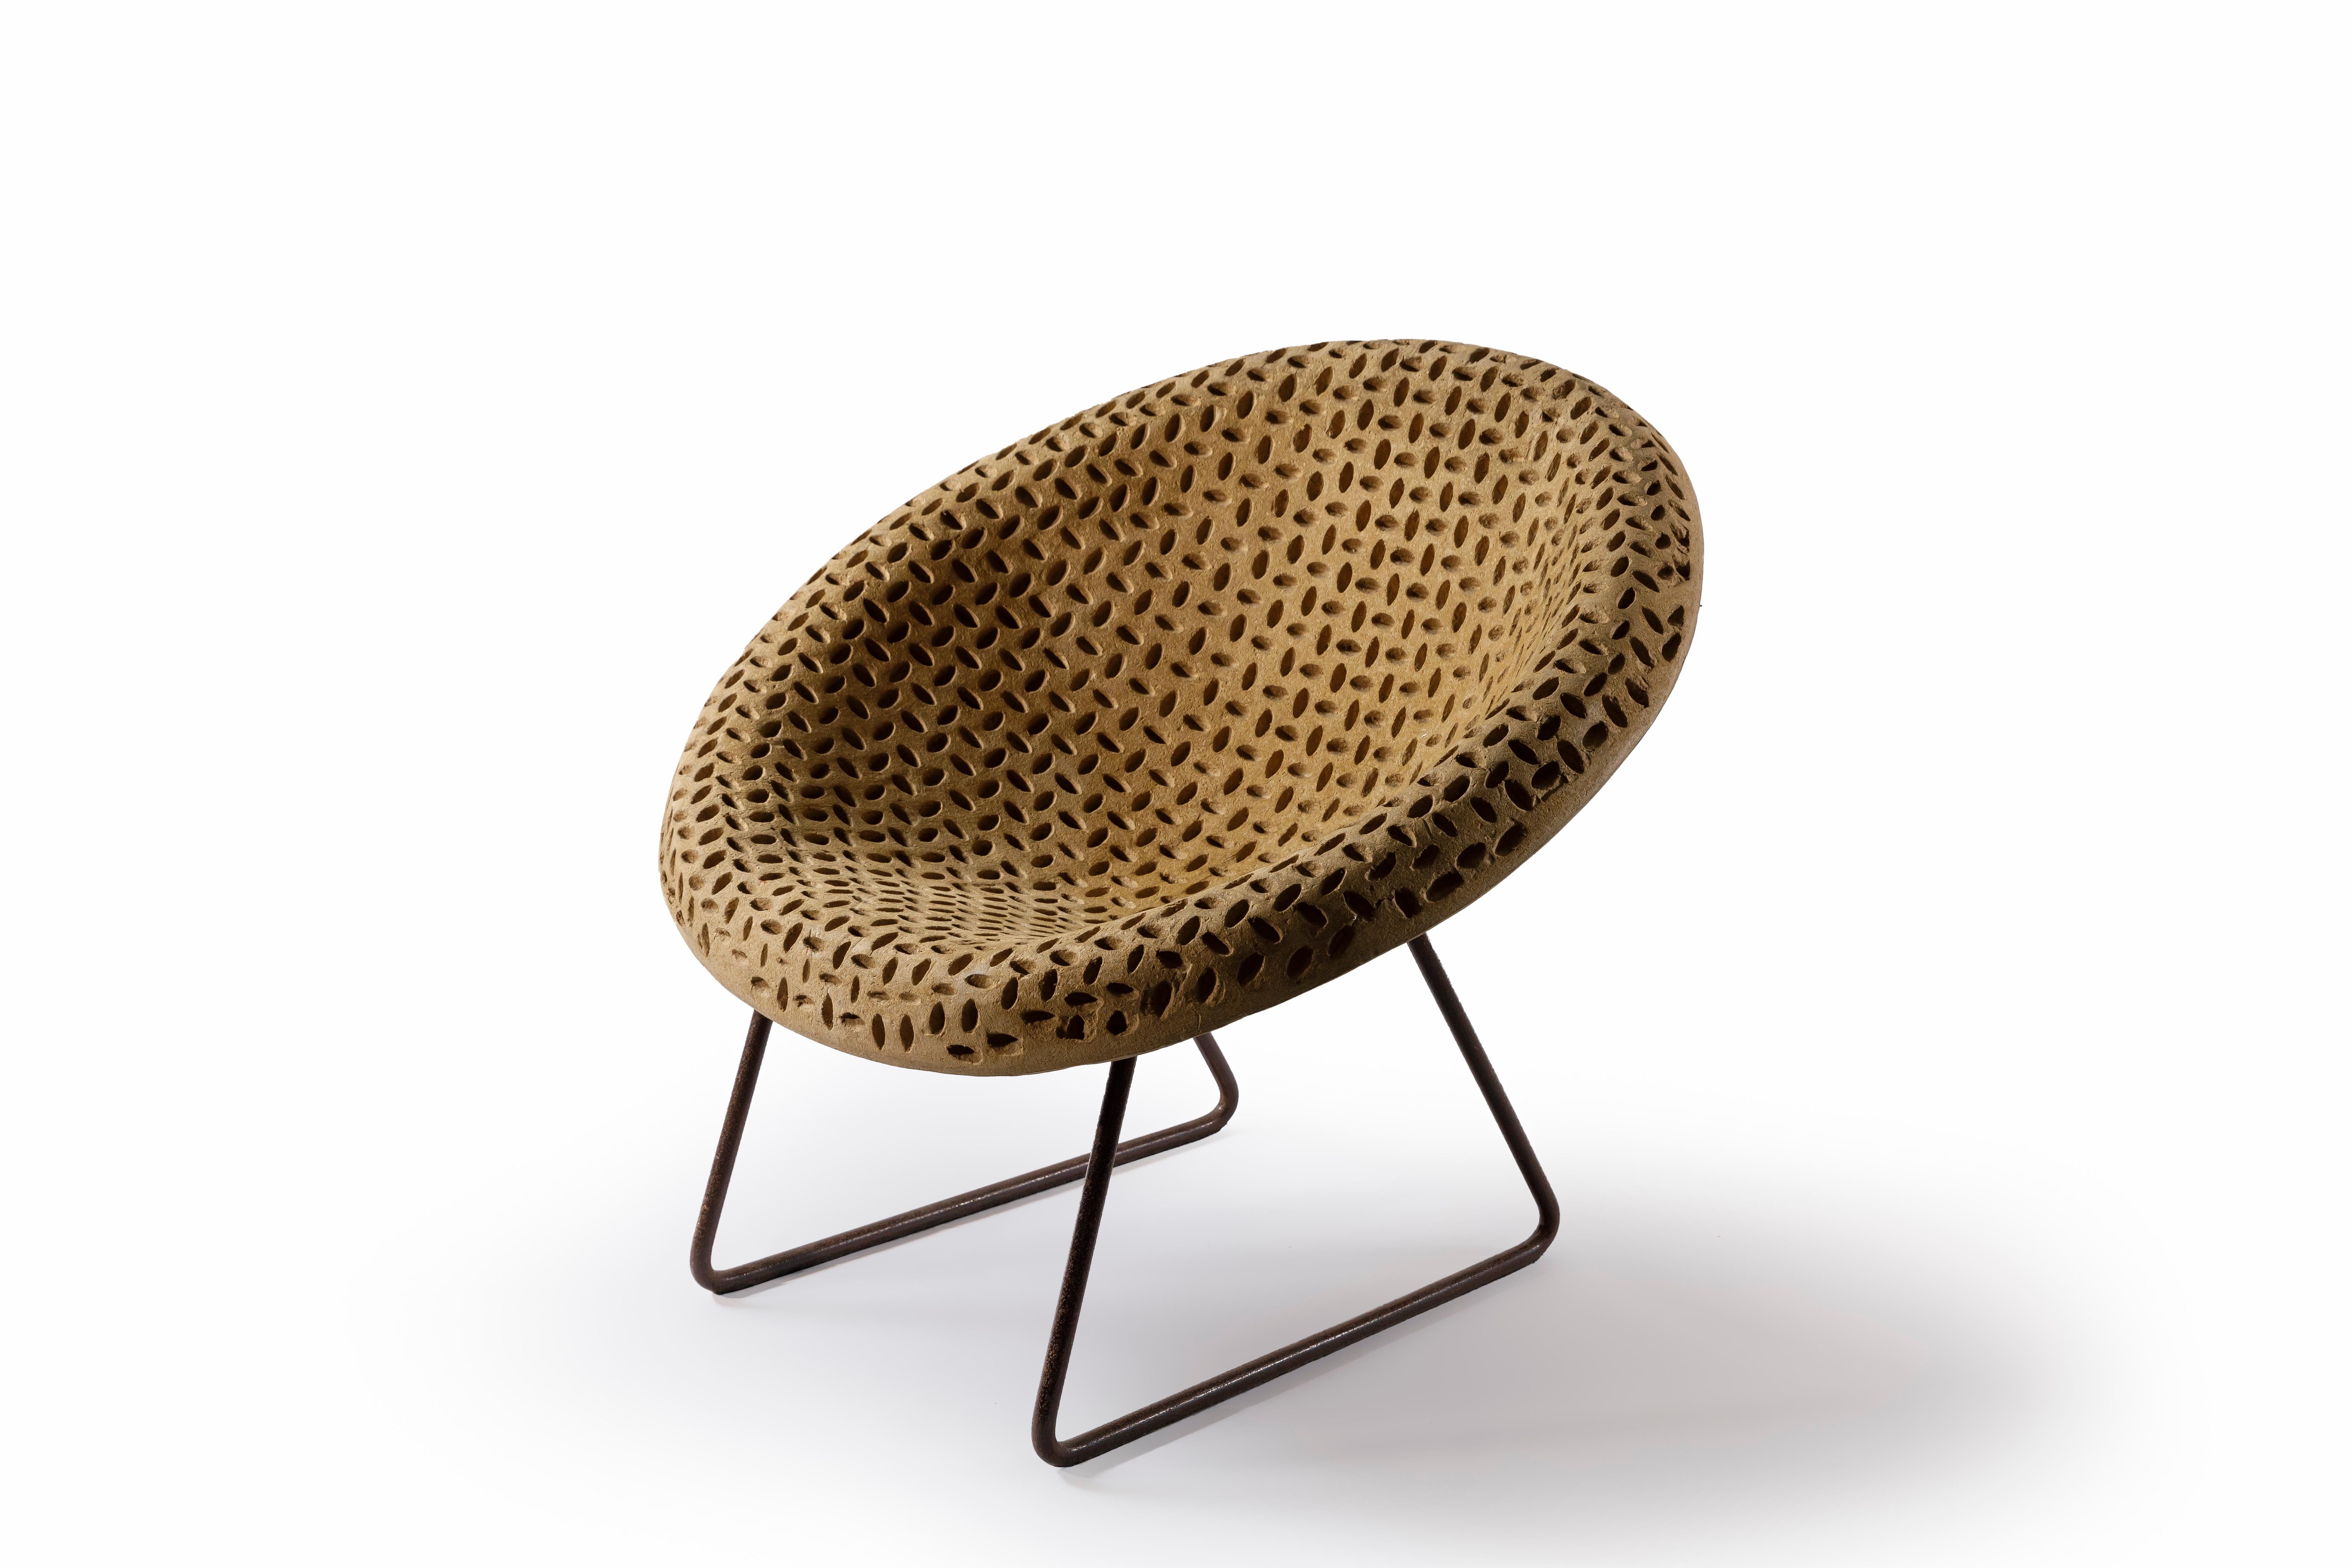 Contemporary Semine lounge chair in paper machè technic and iron structure by Domingos Tótora.
Totora produces his works from discarded cartons recycled, each piece has their own time to be ready, his process is completely handcrafted.

About the